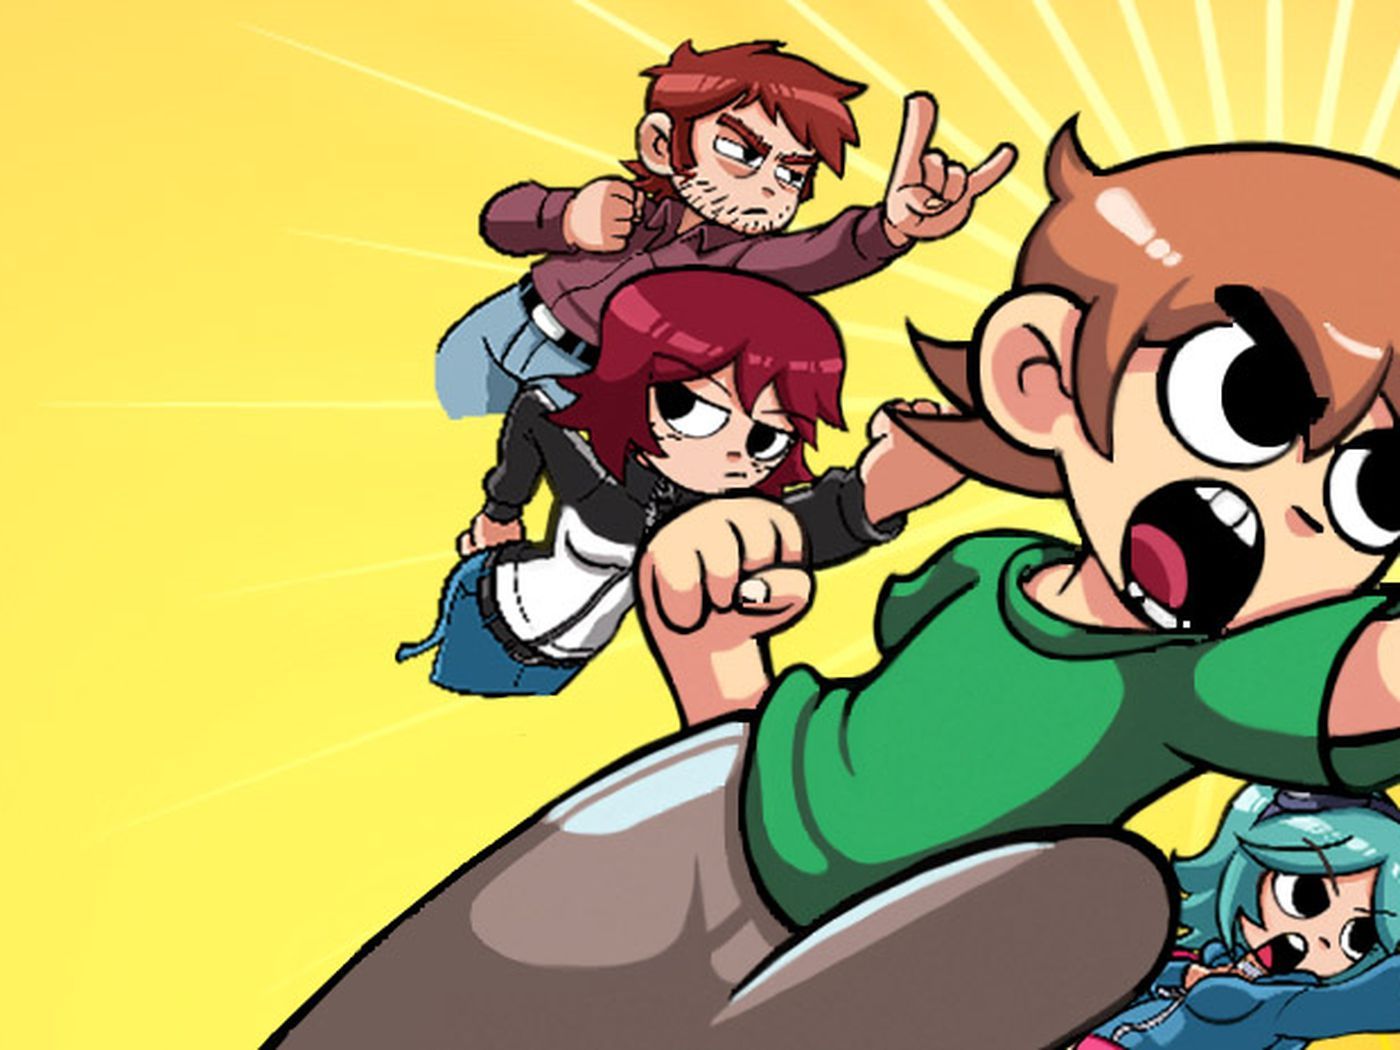 Scott Pilgrim game is back after years of being delisted